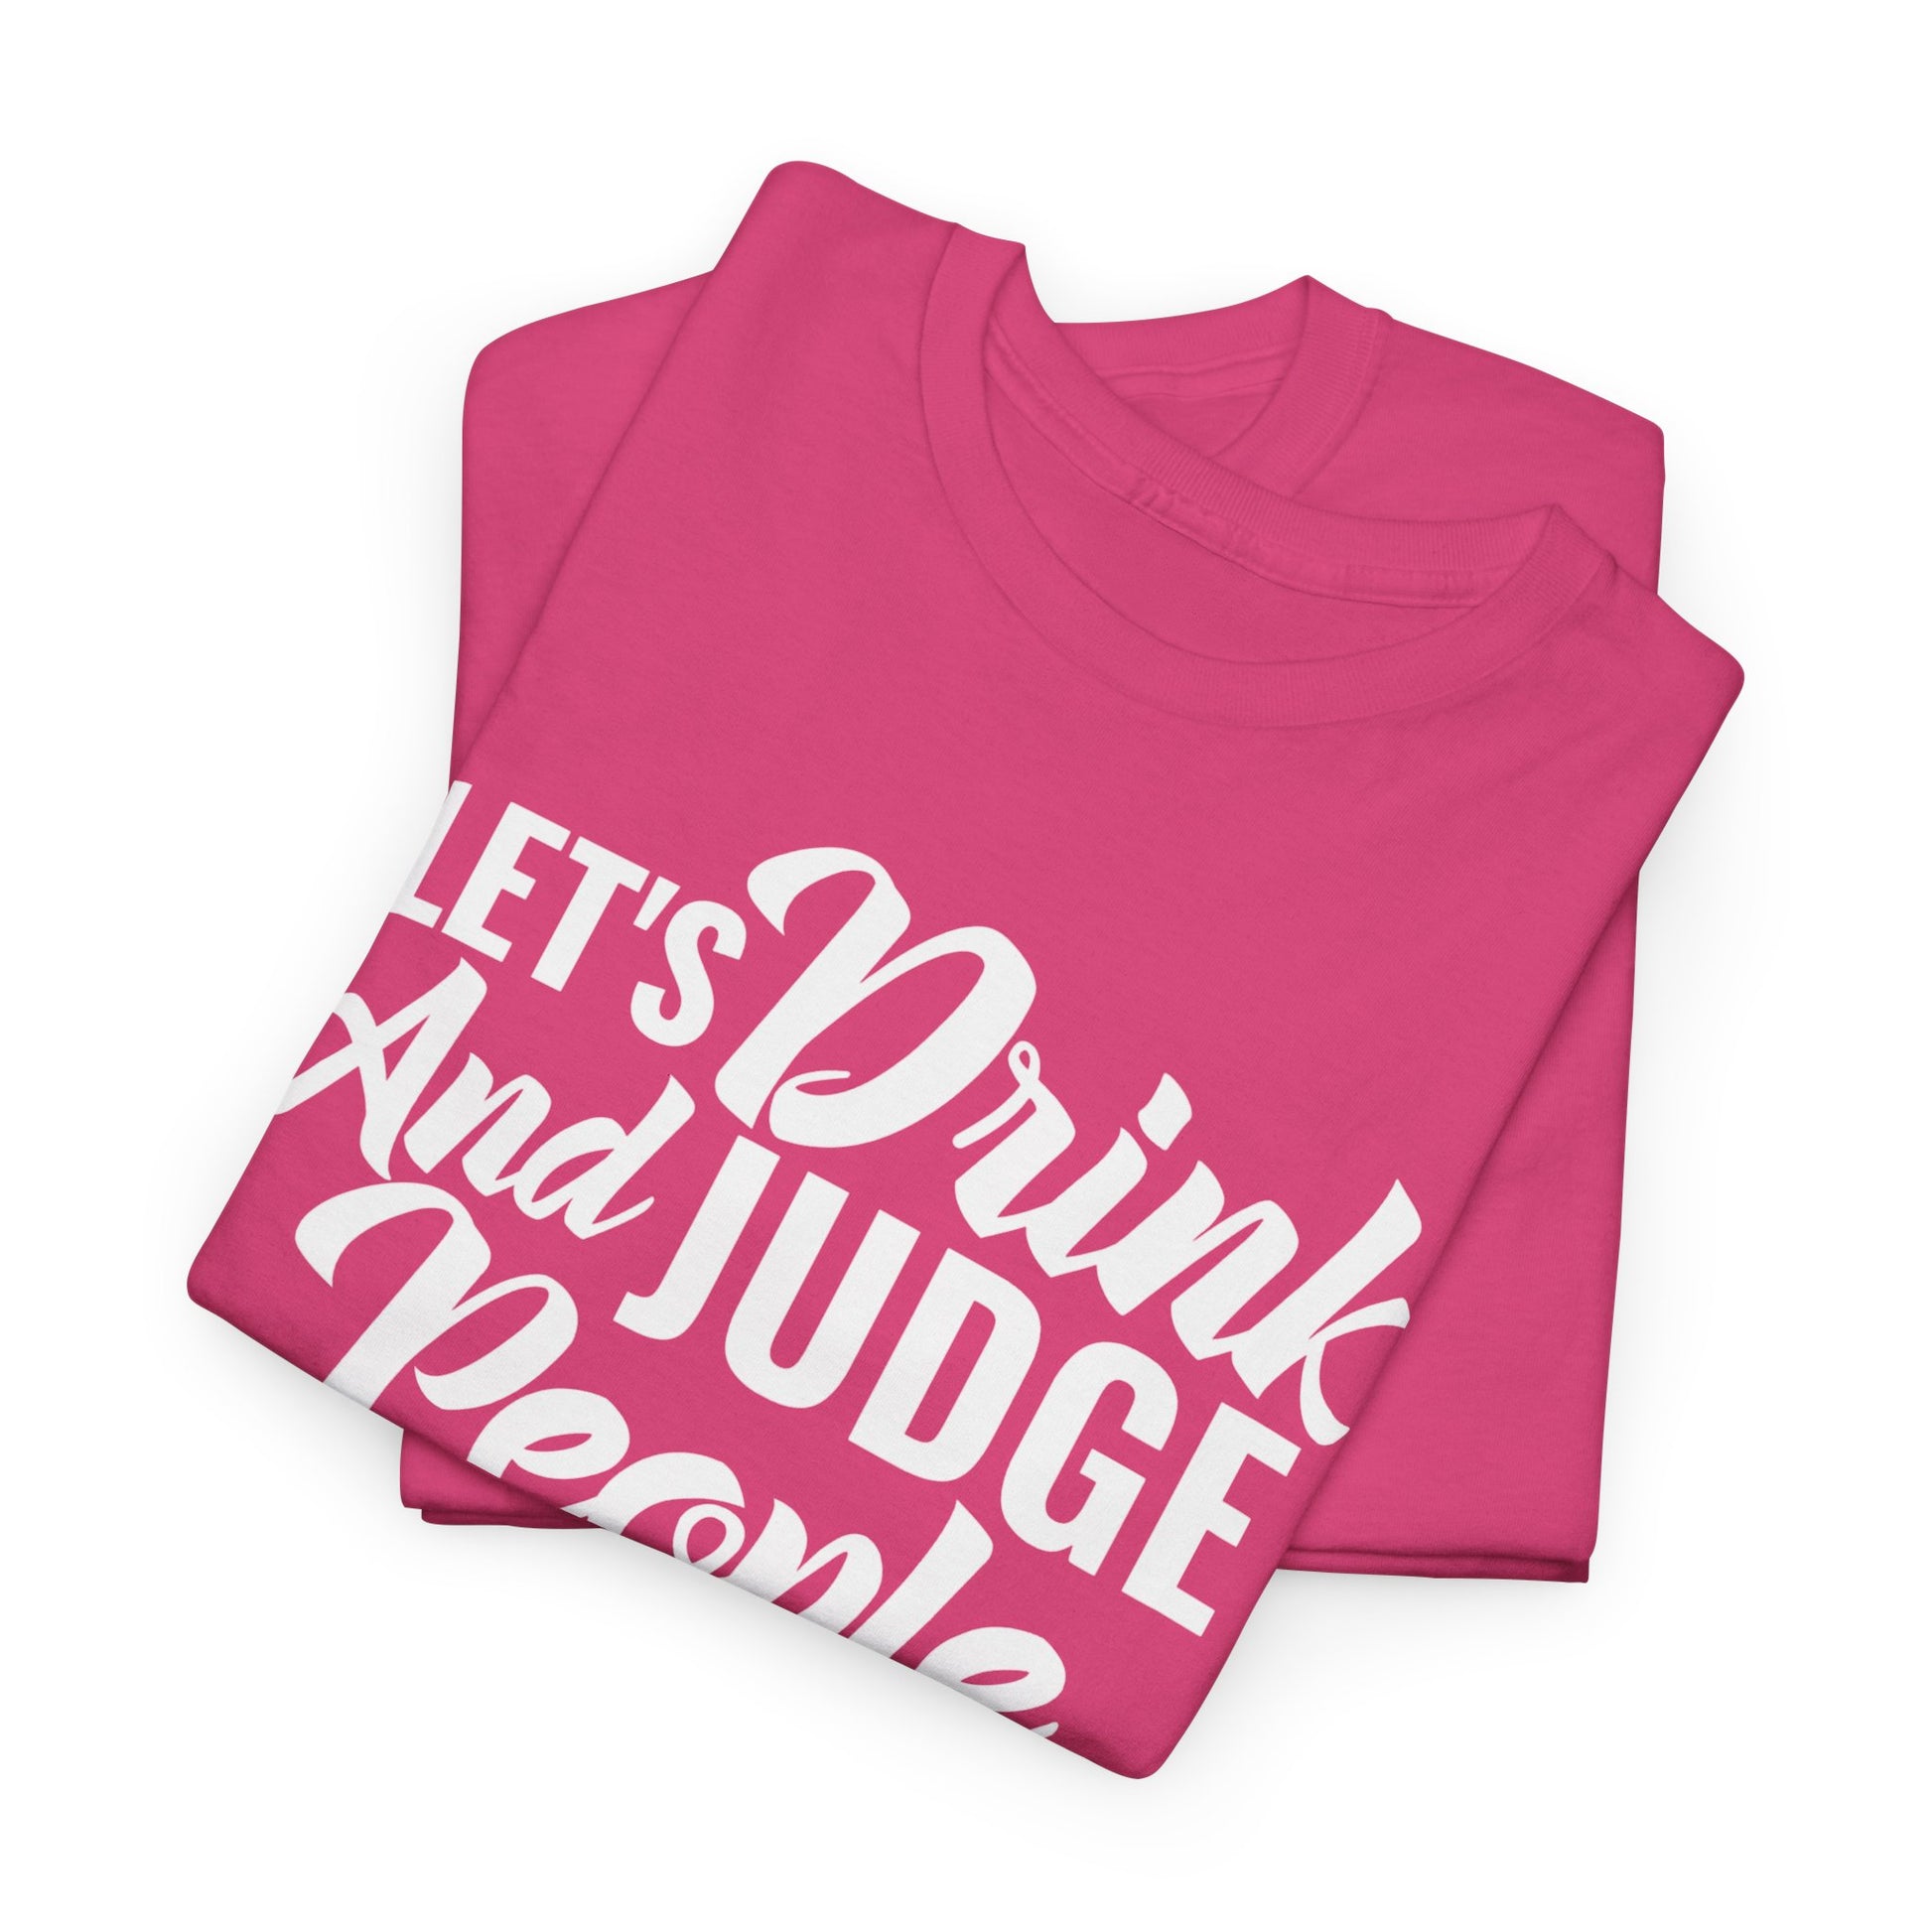 Drunk and Judgy - Craftee Designs & Prints 